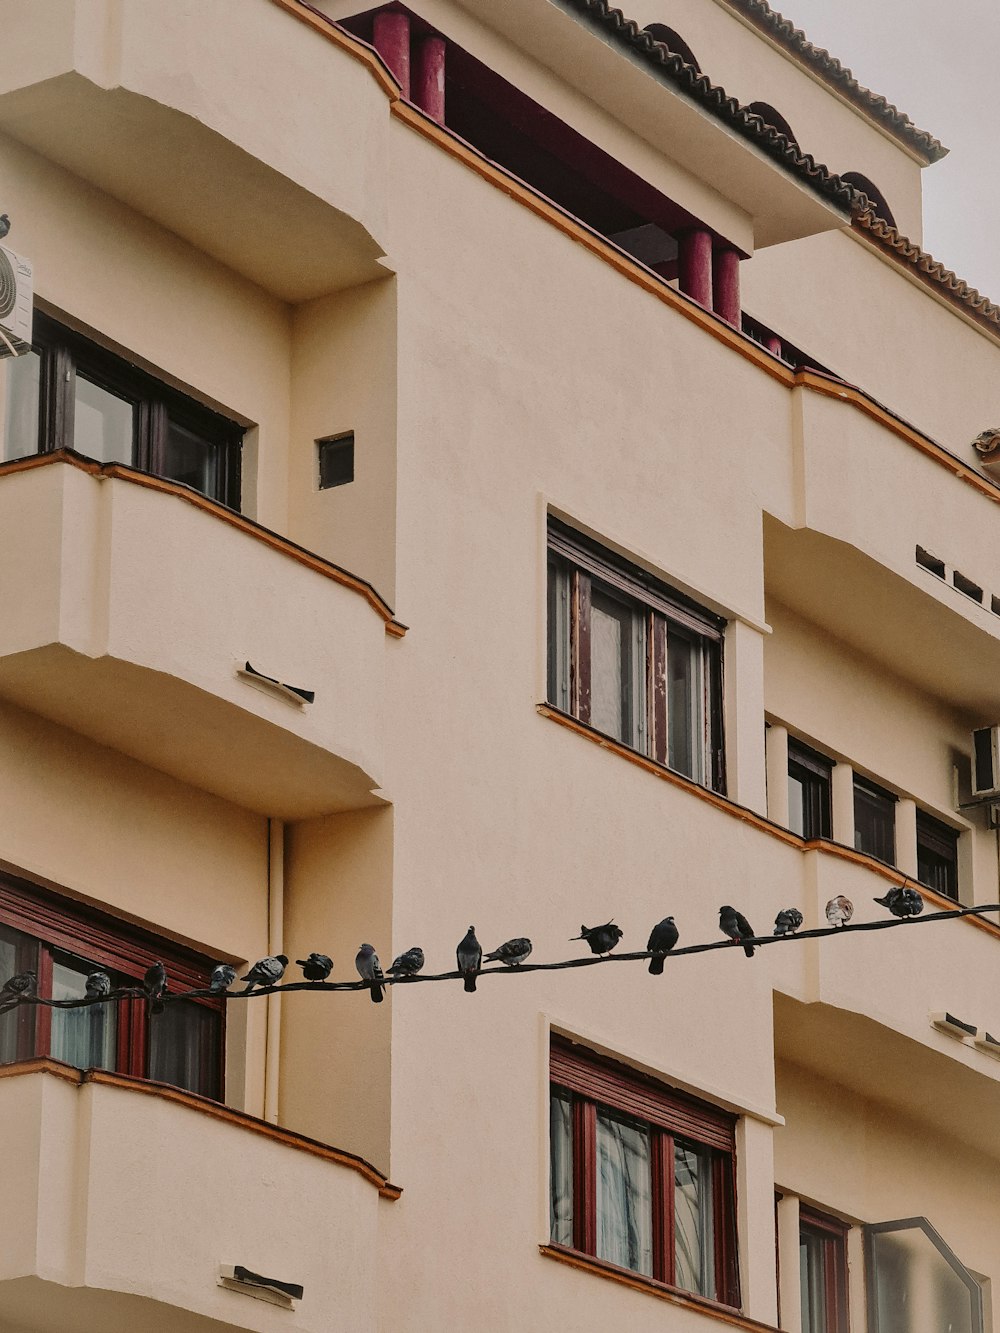 a flock of birds sitting on a wire in front of a building